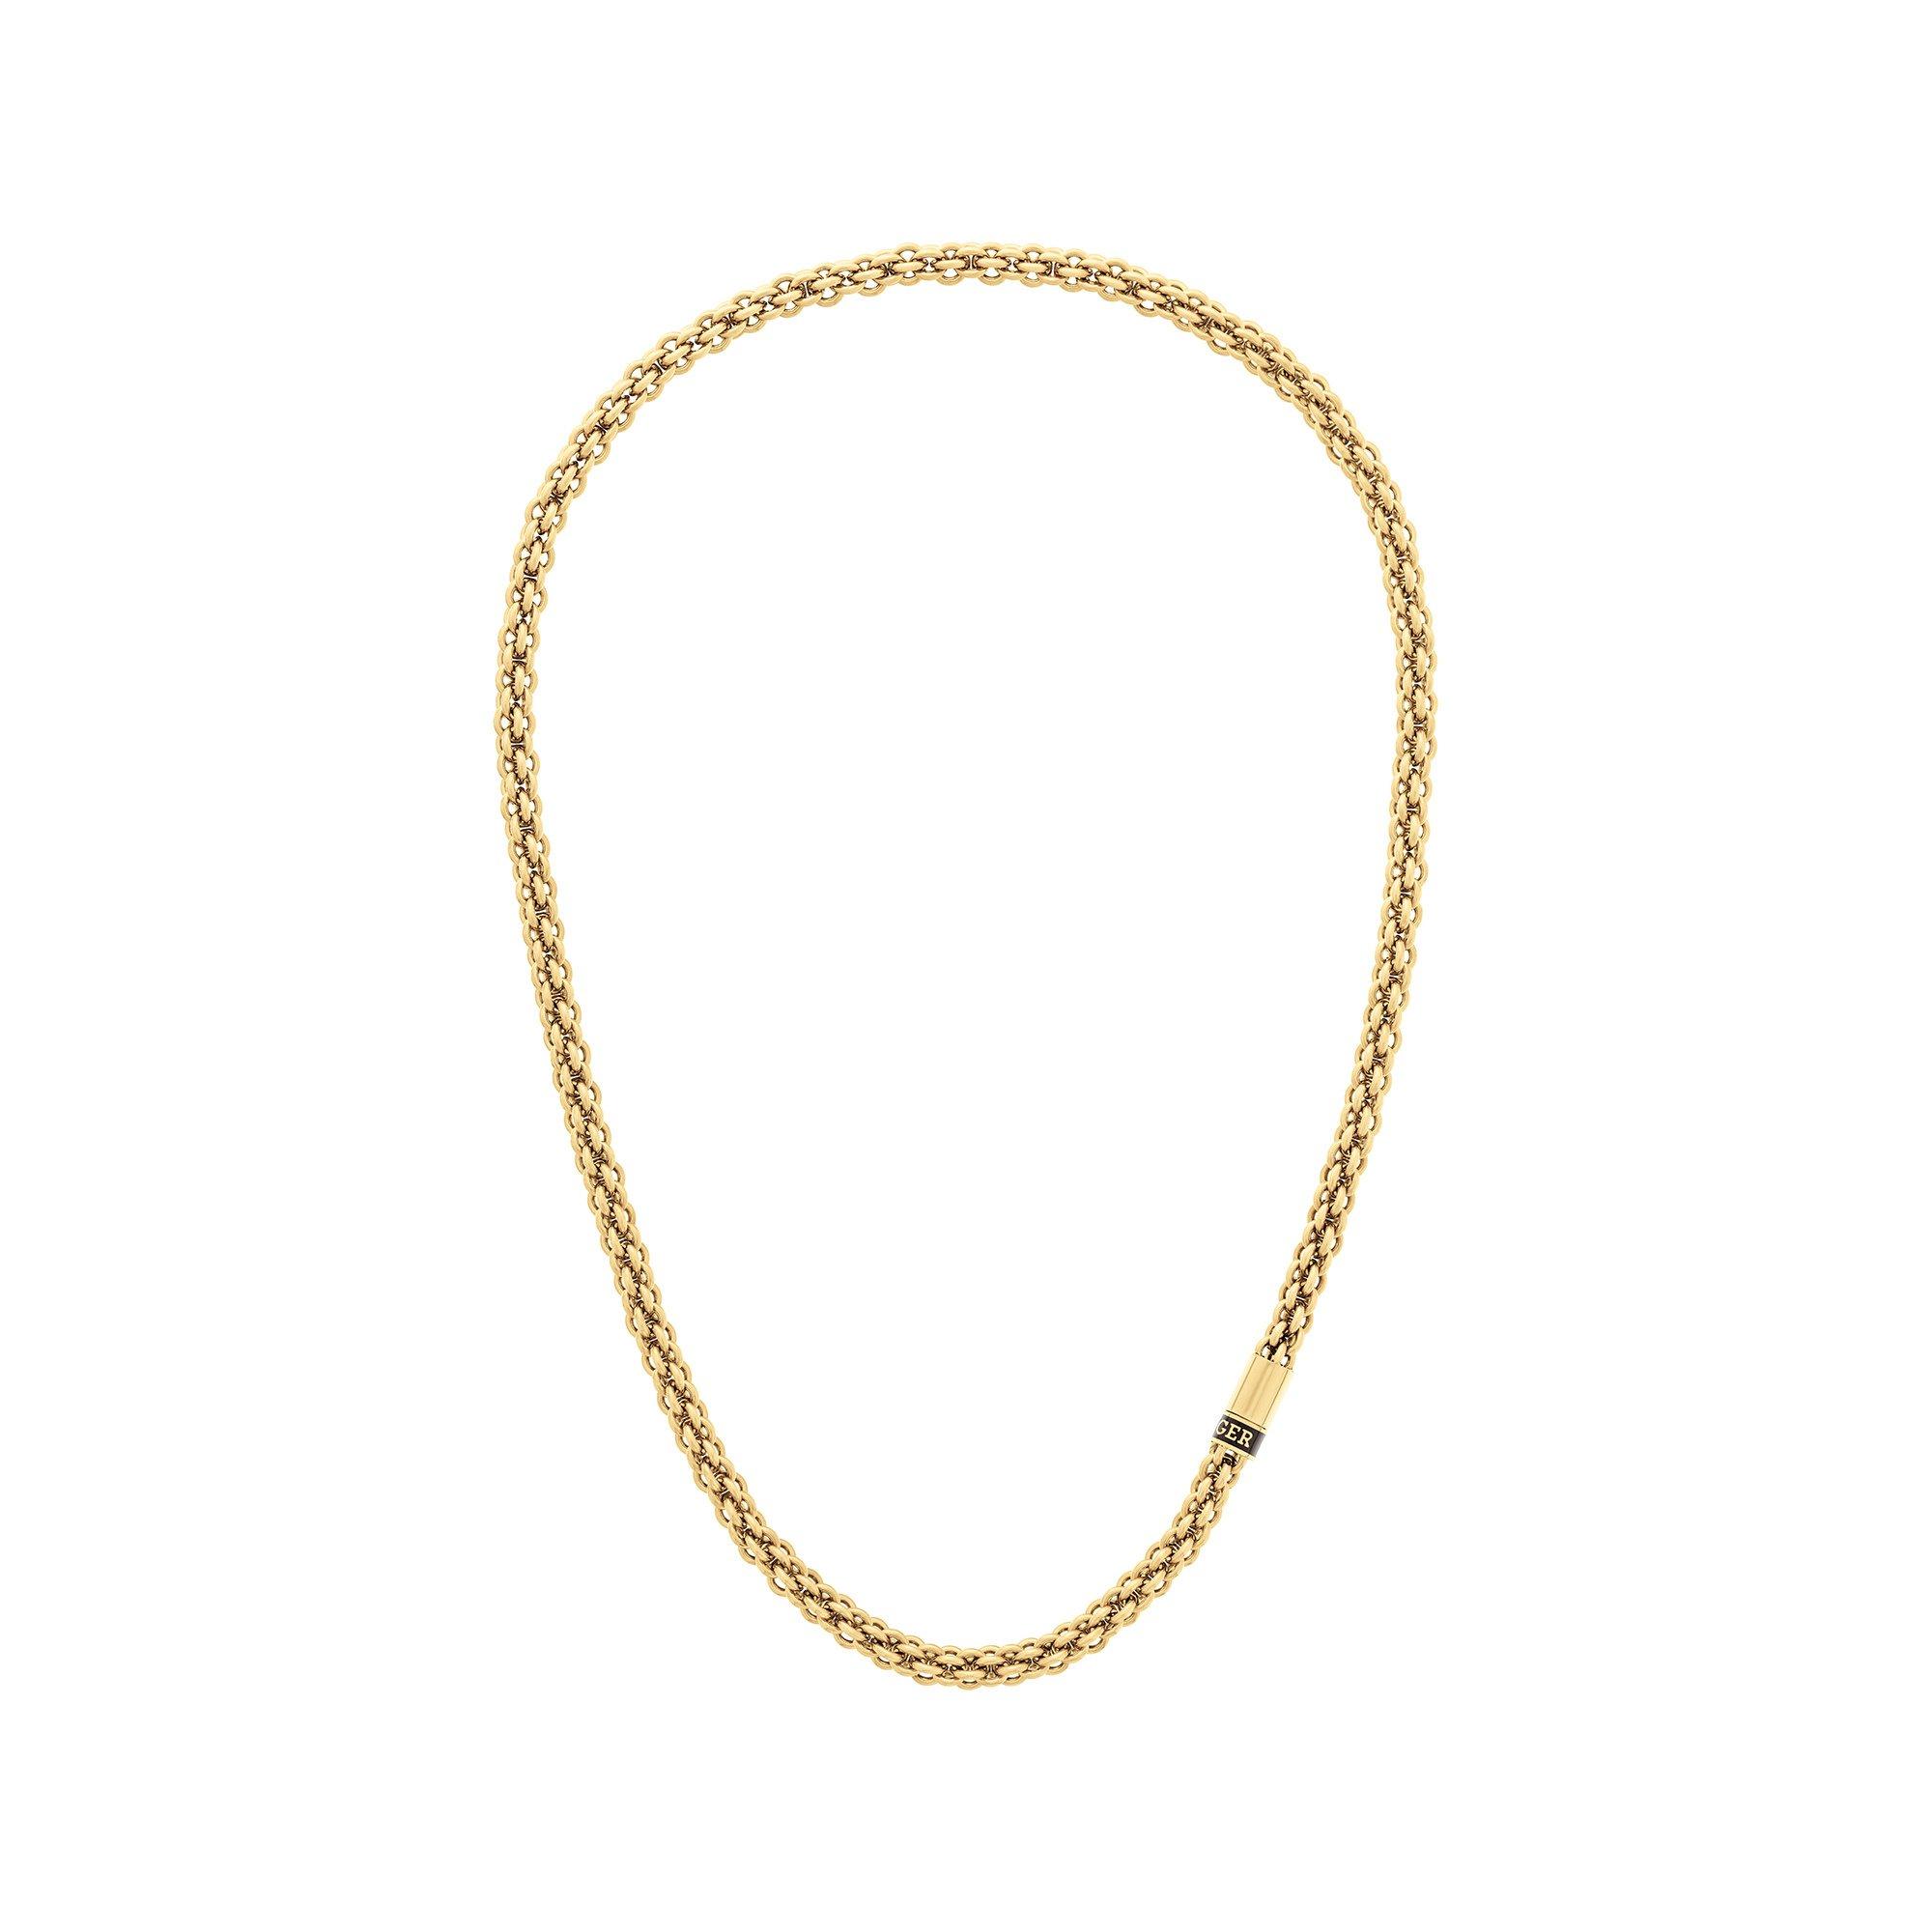 TOMMY HILFIGER INTERTWINED CIRCLES CHAIN Halskette 